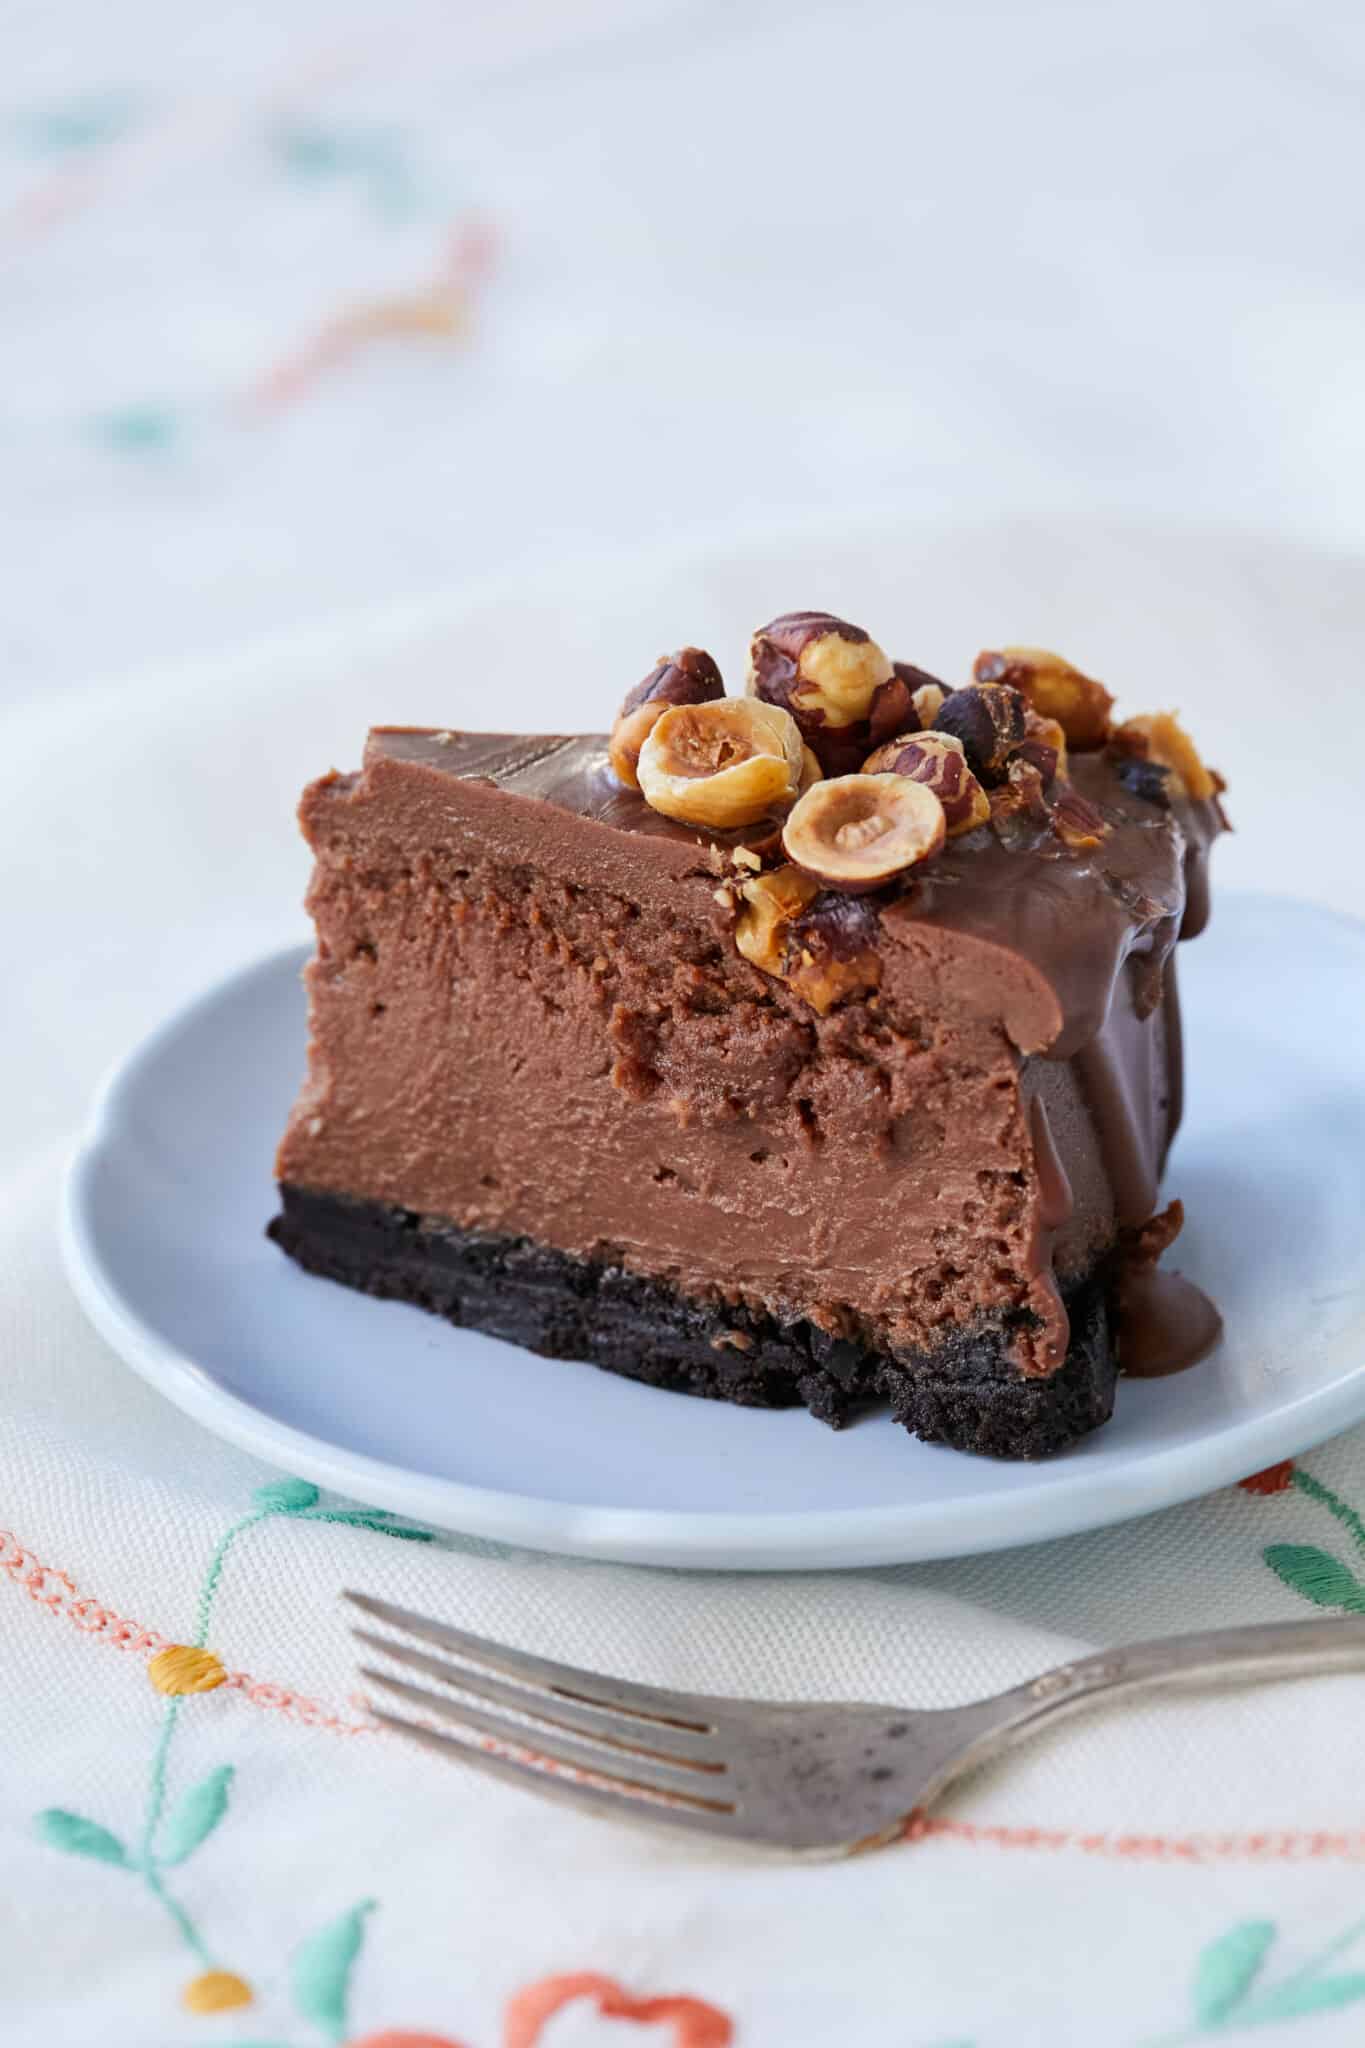 A close-up shot at a slice of the Heavenly Nutella Cheesecake, shows the rich cookie crust, creamy chocolate cream cheese filling and silky smooth ganache coating. It's topped with crunchy toasted hazelnuts for extra flavor and texture. 